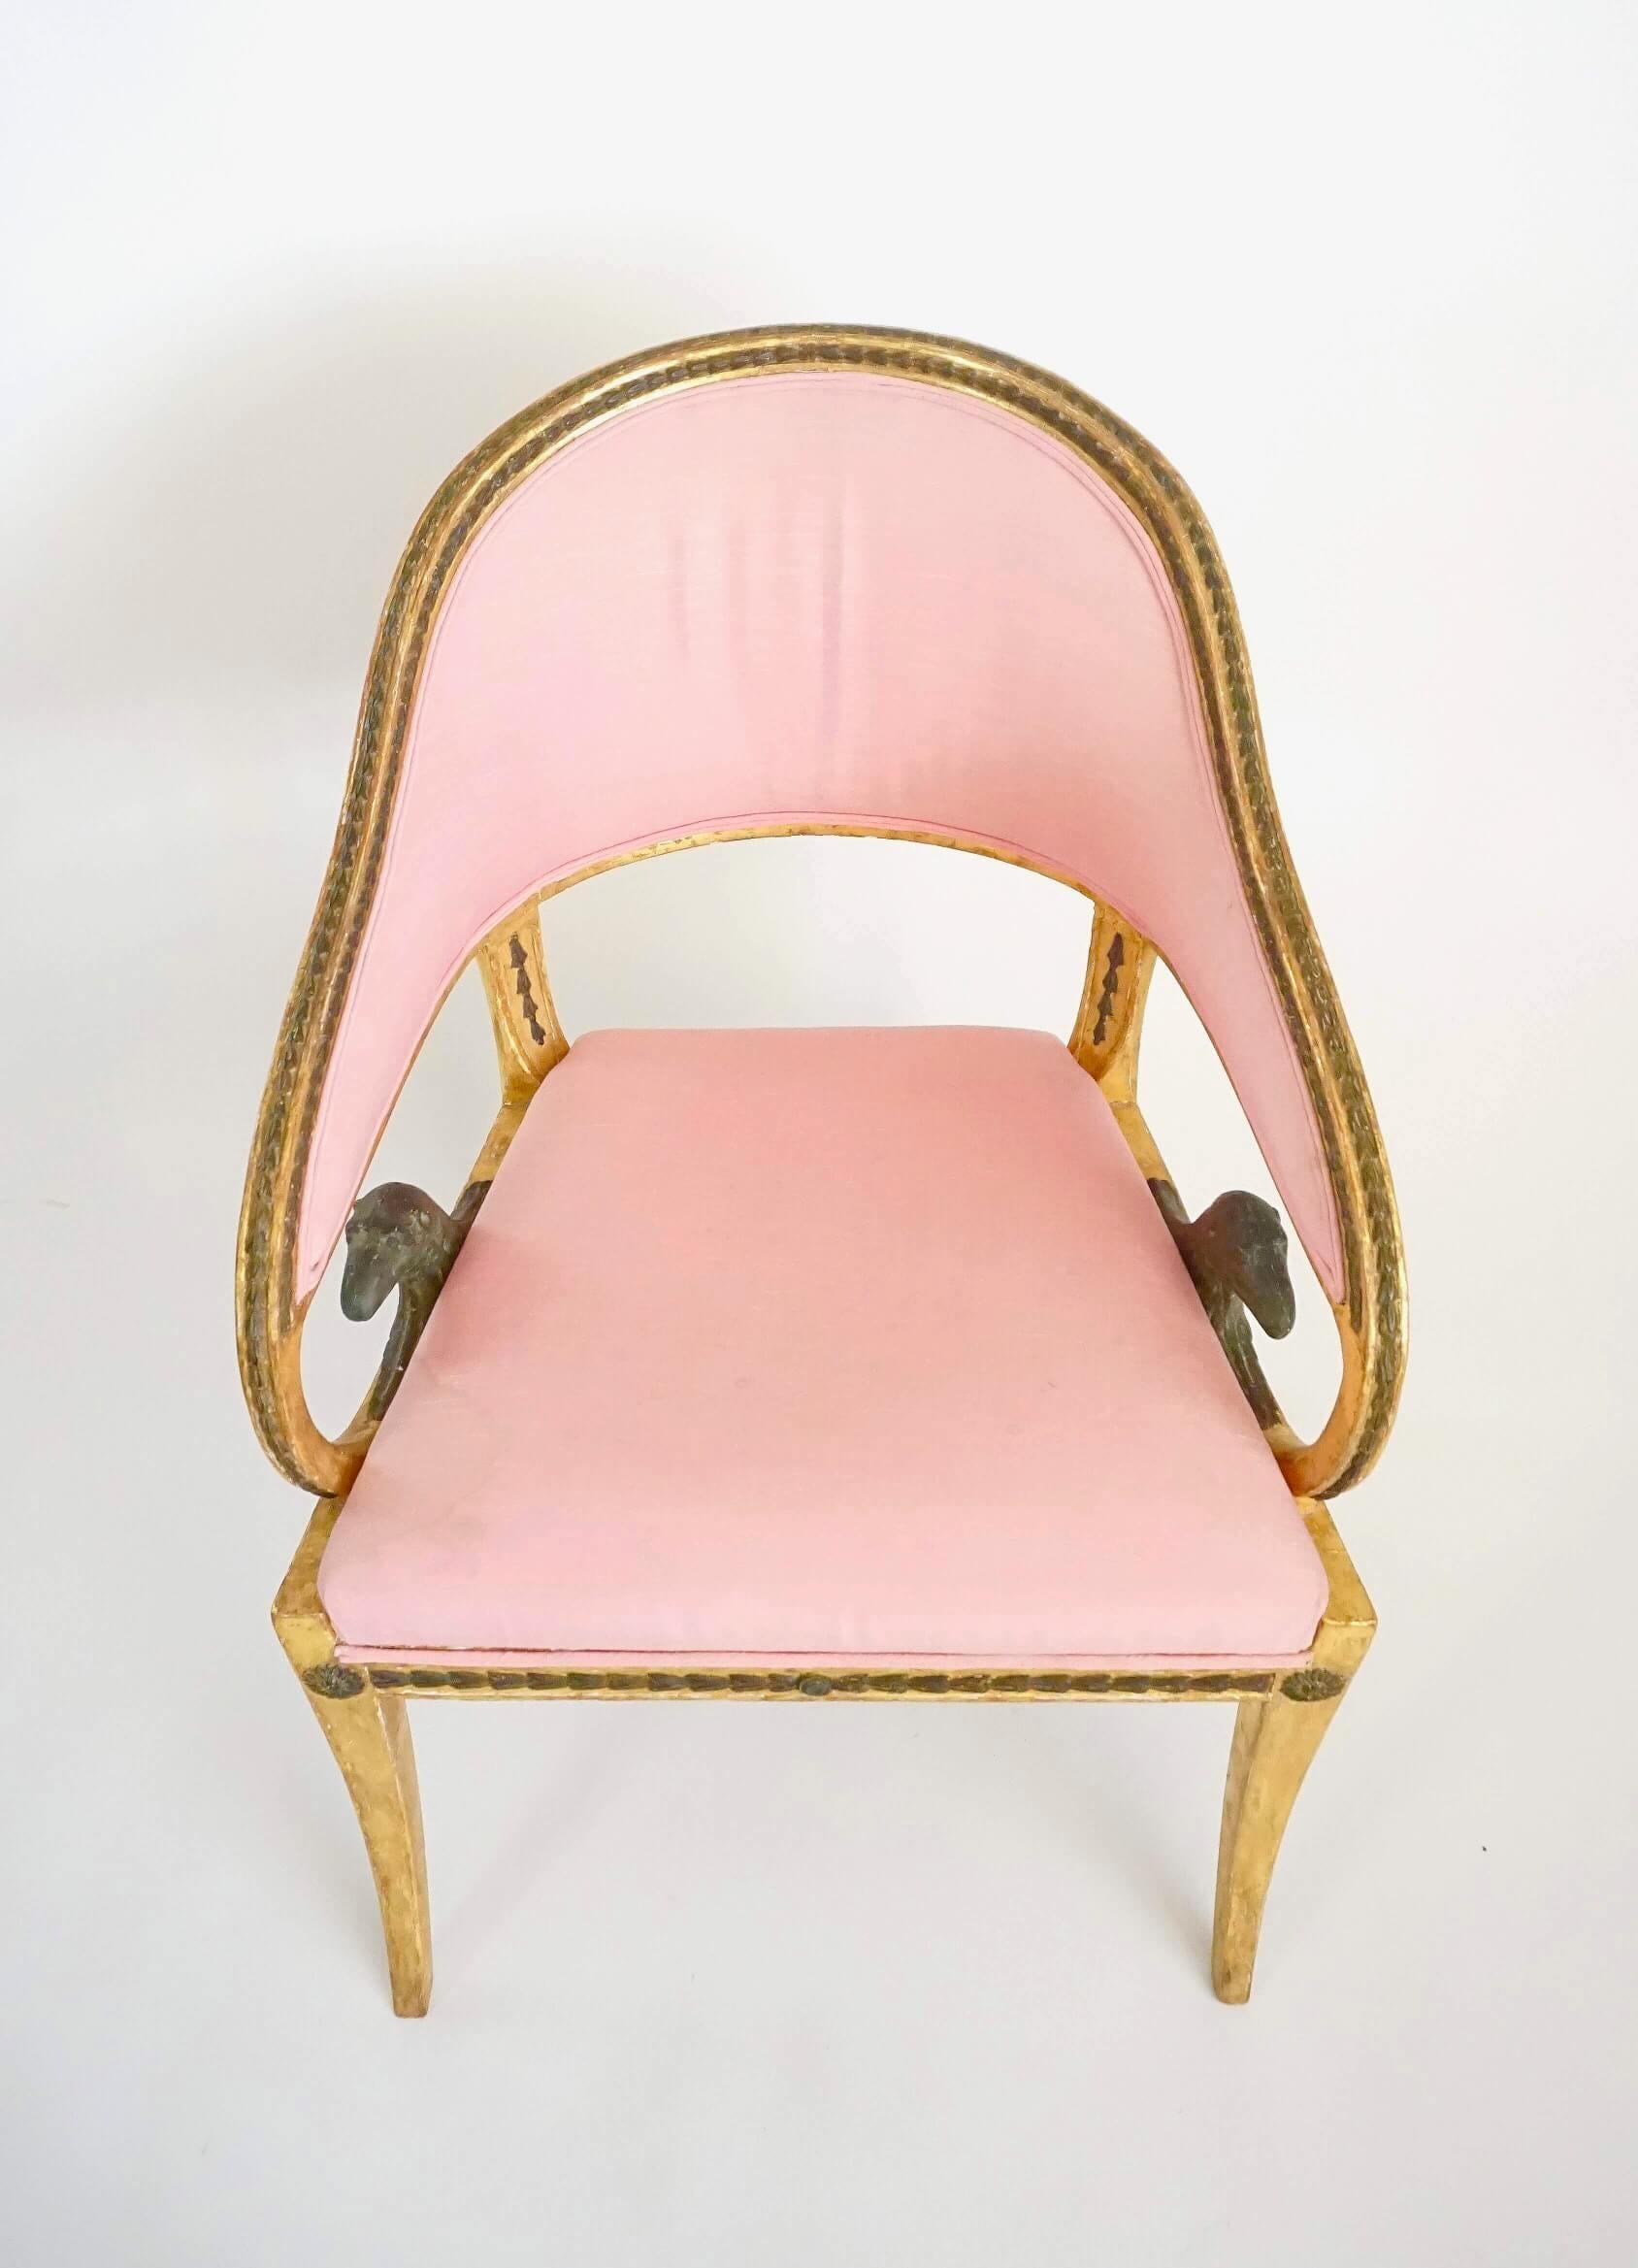 Swedish Gustavian Neoclassical Giltwood Fauteuil by Ephraim Ståhl, circa 1800 For Sale 2